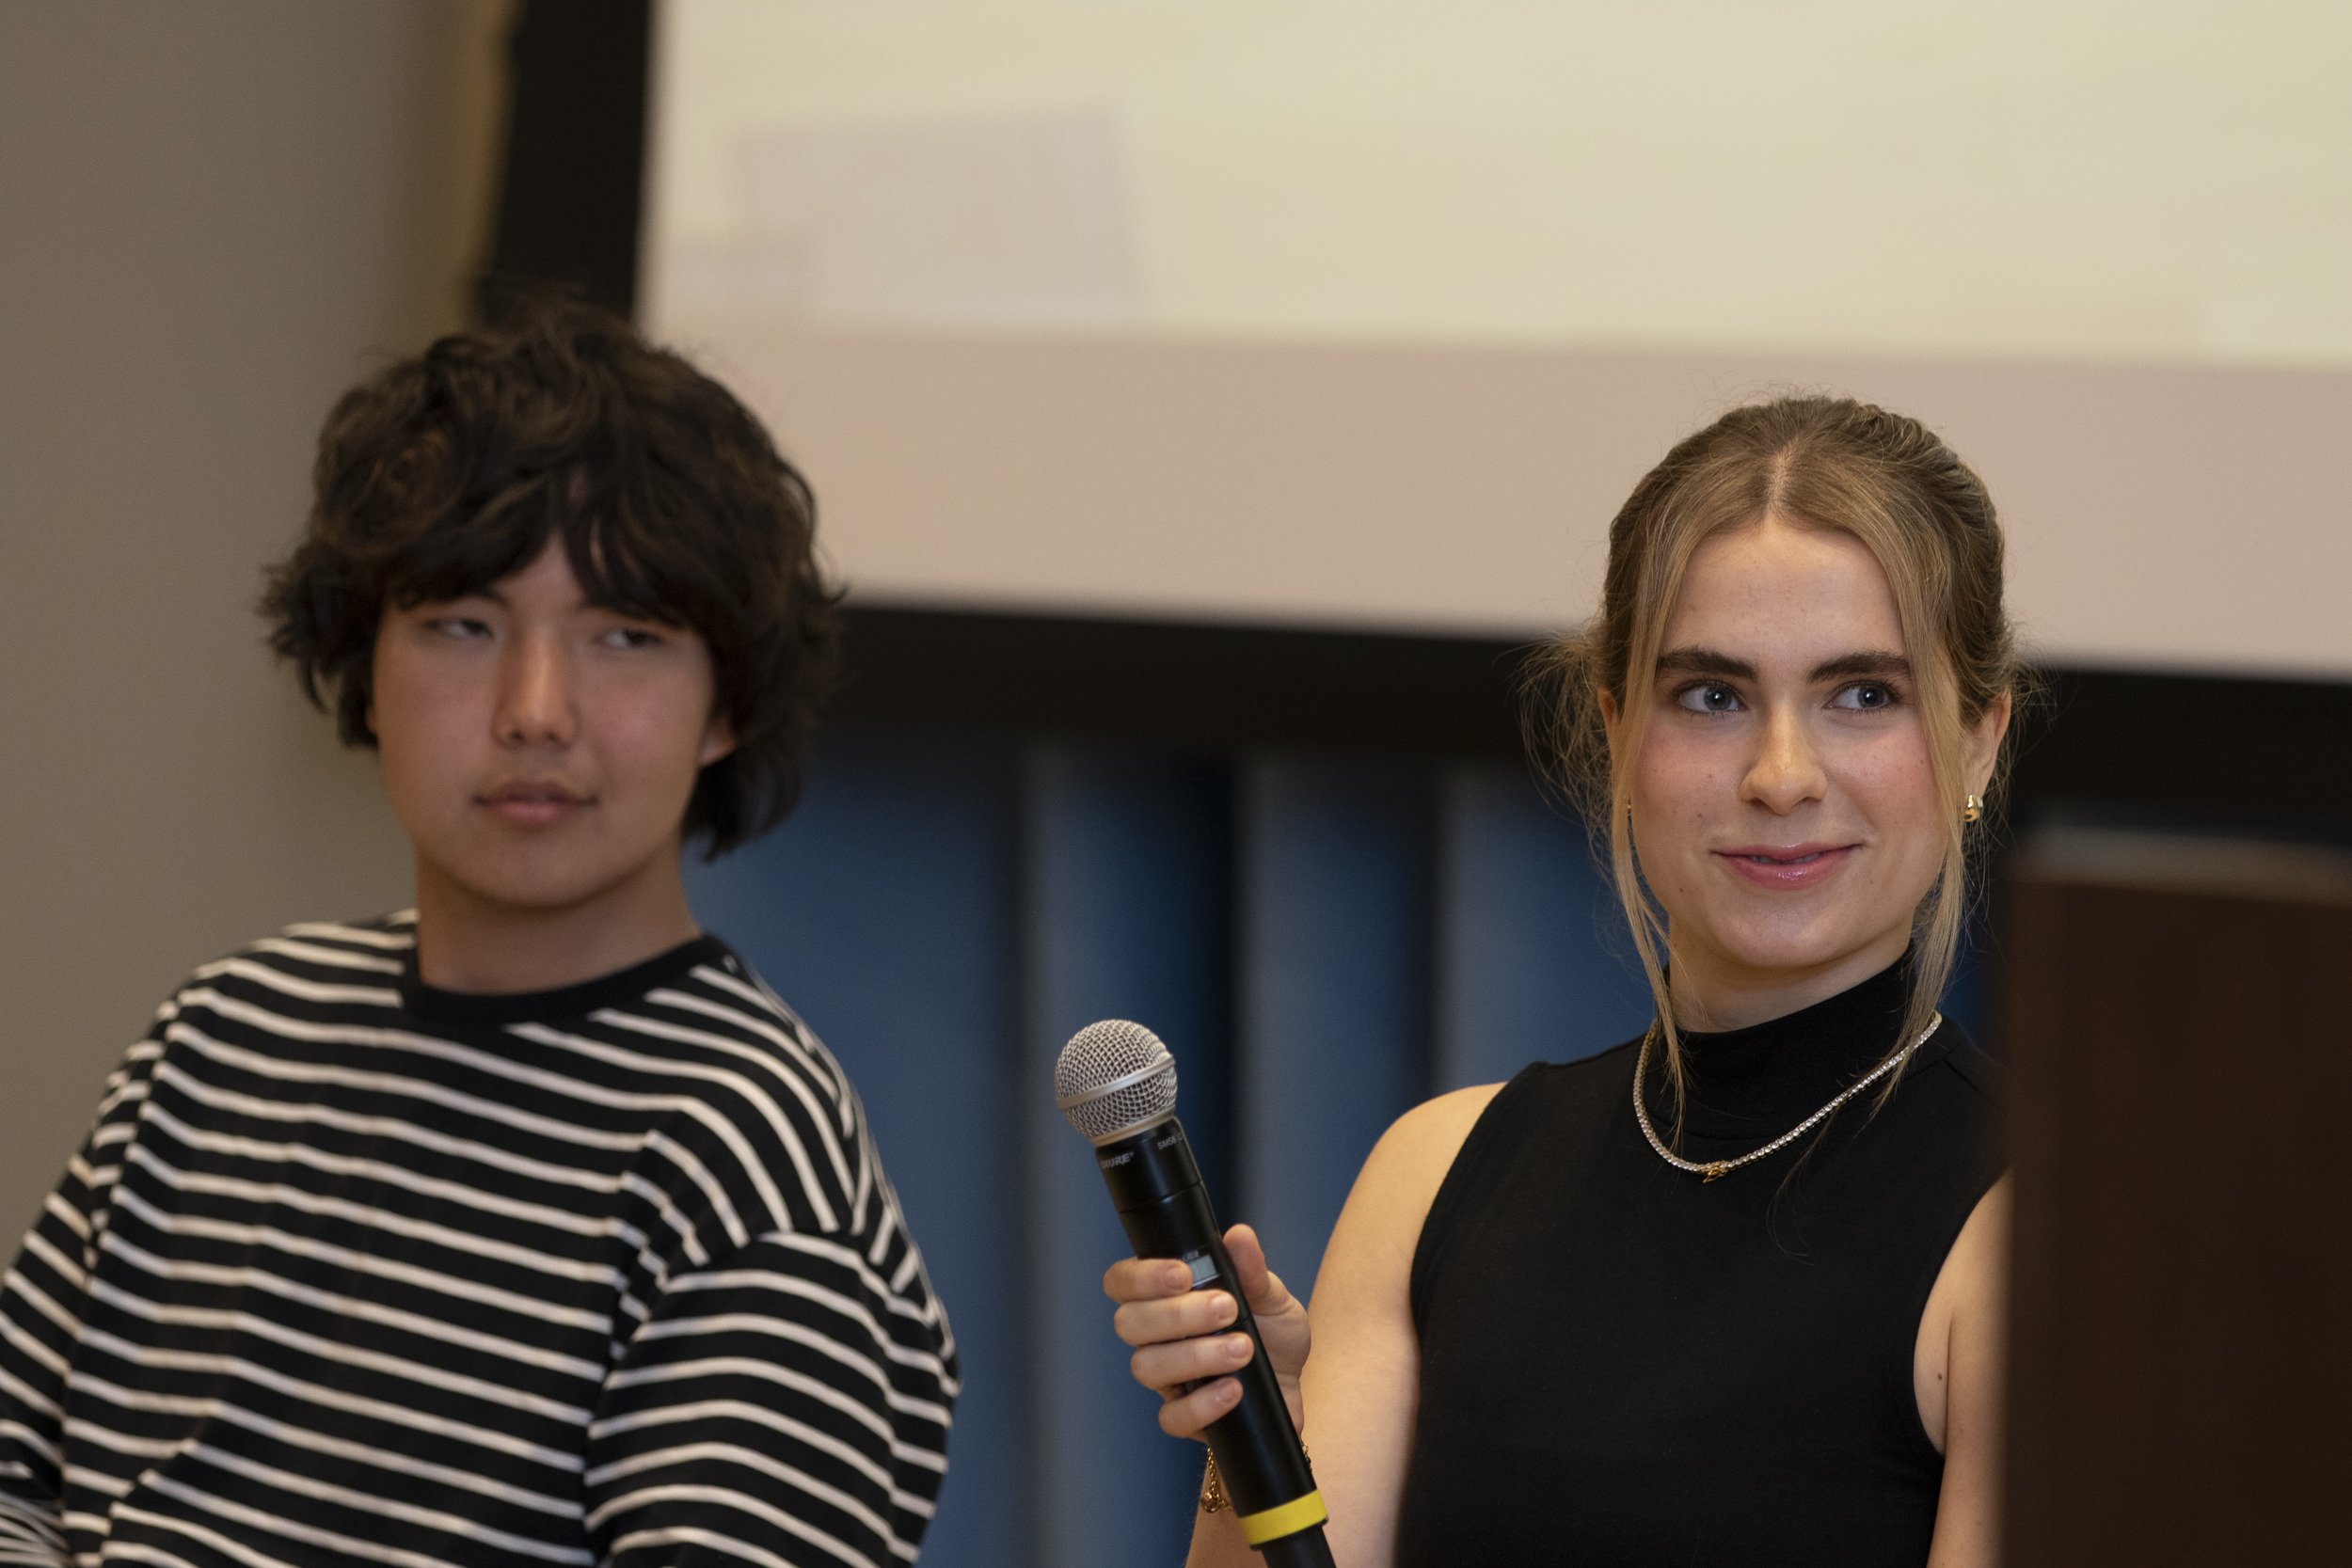  Candidates running for the A.S. Director of Sustainability position, Temuulen Tsedenish and Julia Kowalski (L-R) answer questions during the AS election event at Santa Monica College. Santa Monica, Calif., on March 30th, 2024.  (Corsair Photo: Luca 